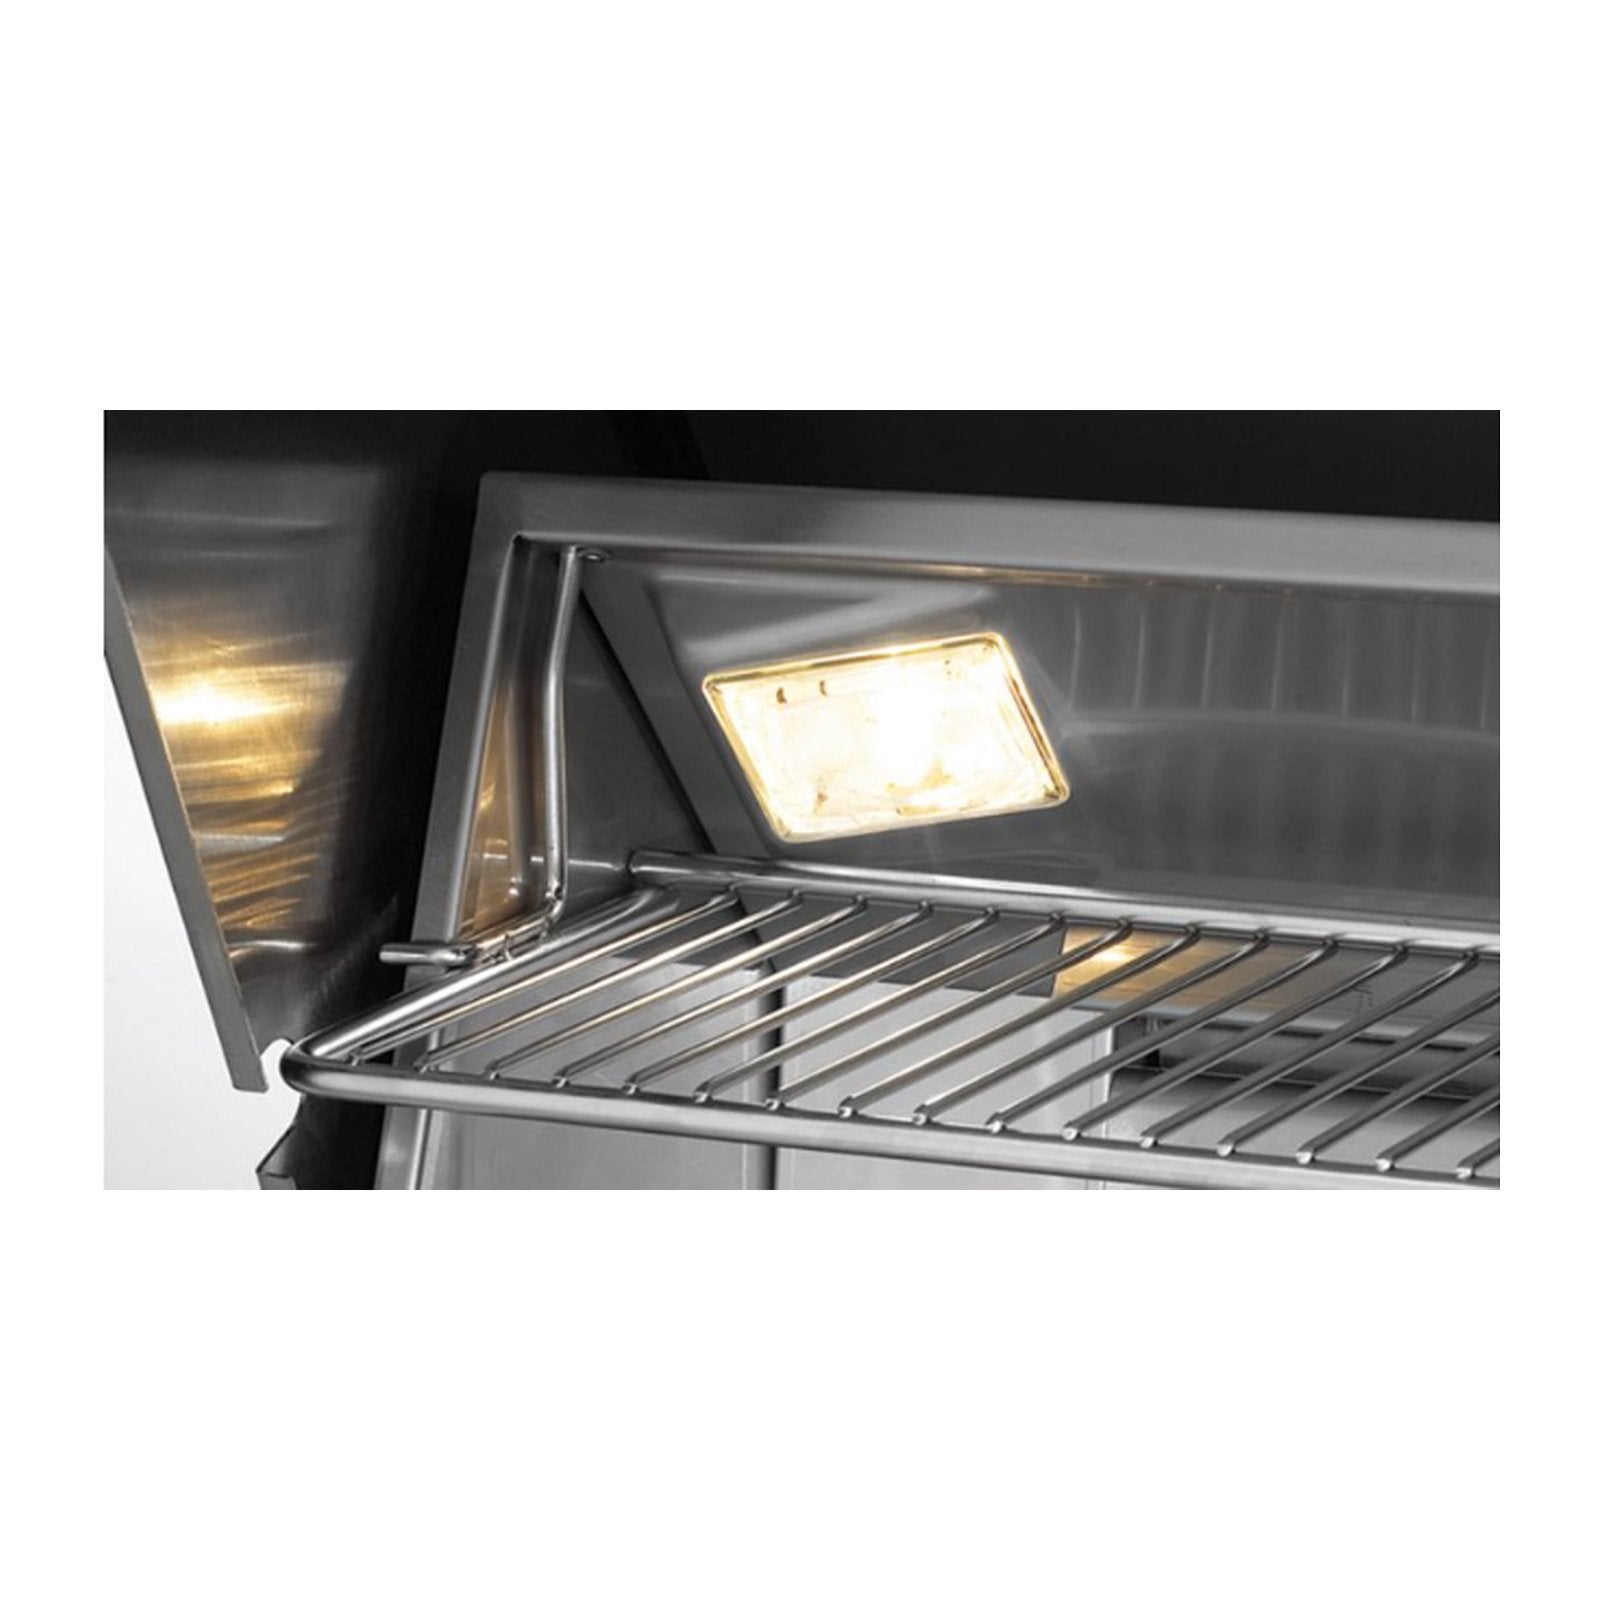 fire-magic-30-e660i-built-in-gas-grill-w-rotisserie-analog-thermometer 4